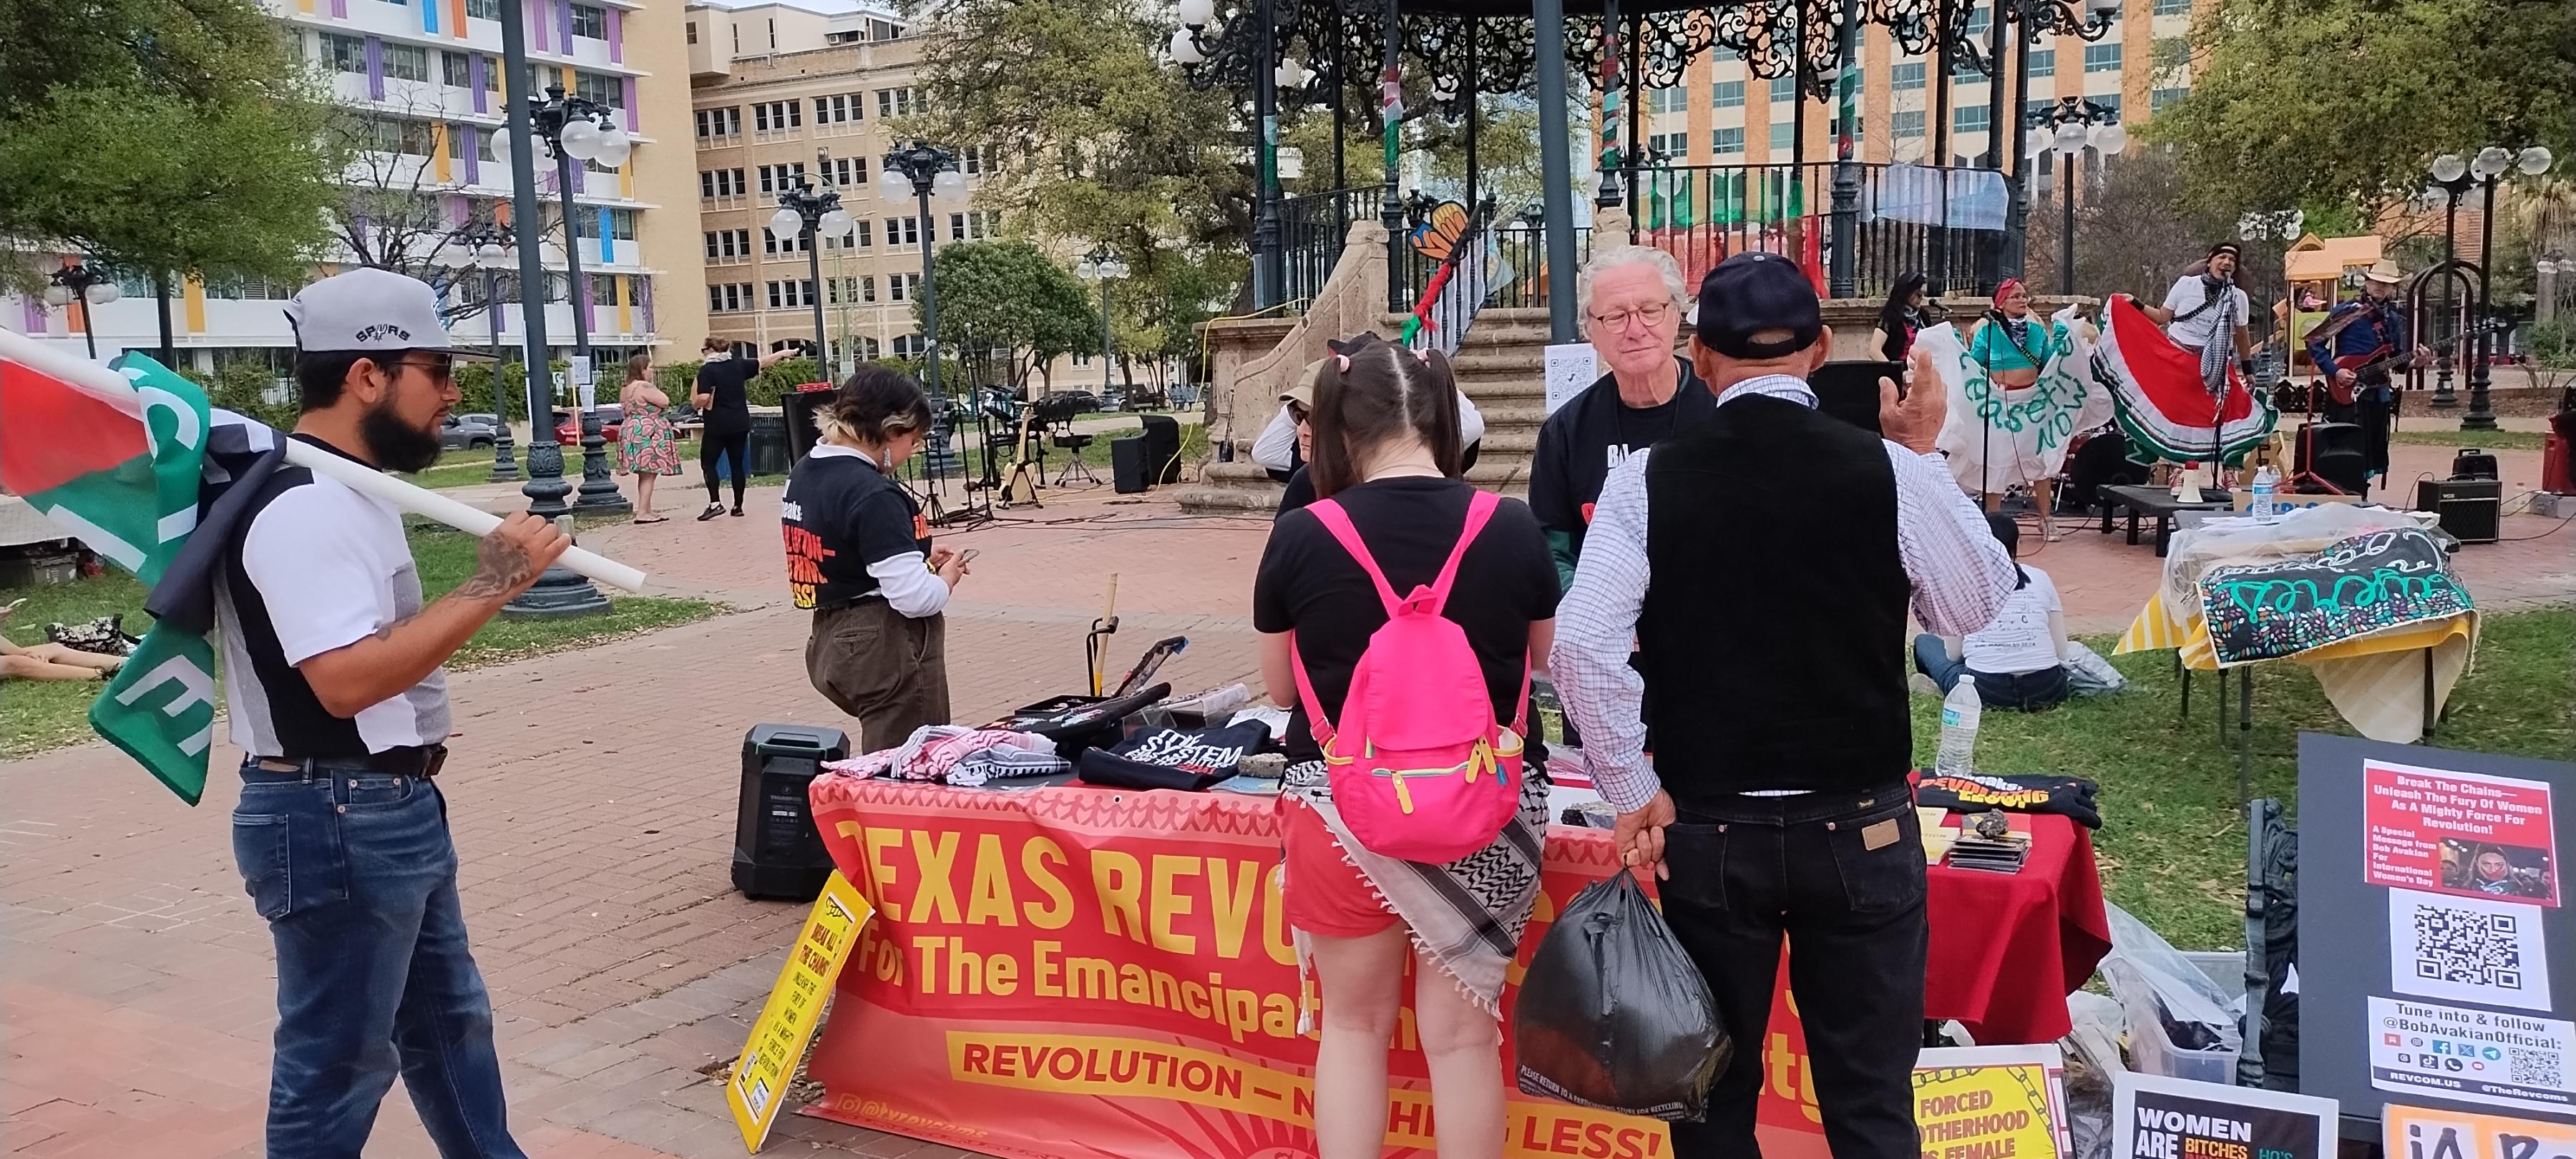 Table at park in San Antonio with banner: Texas Revcom Corps for The Emancipation of Humanity